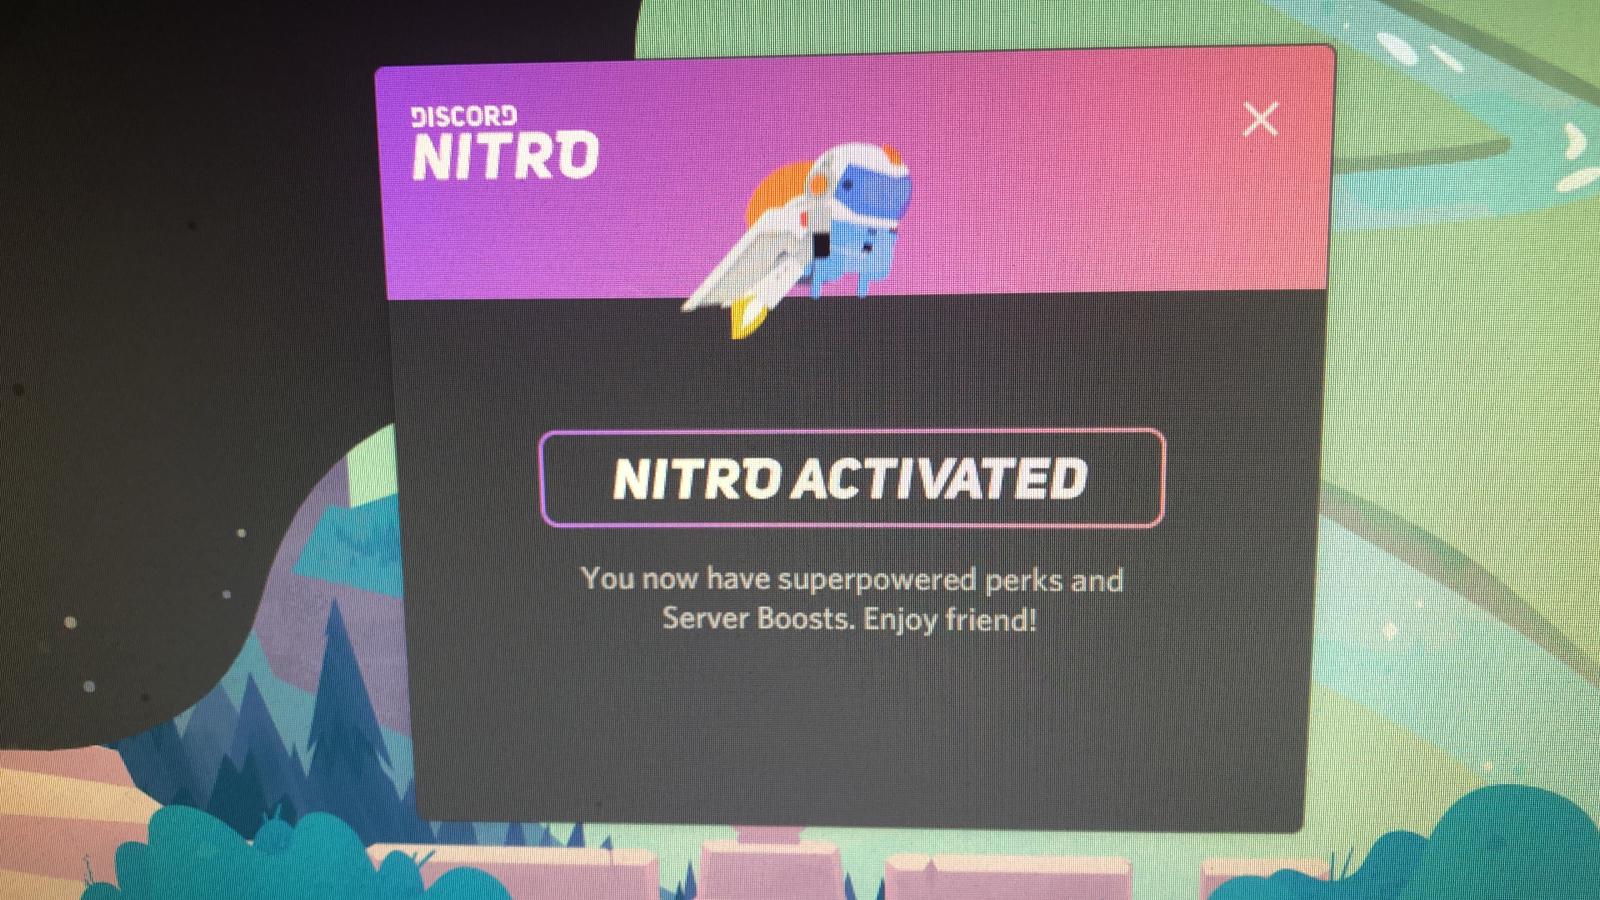 Buy 🔥DISCORD NITRO 3 MONTHS 2 BUST 🚀🚀🚀DELIVERY🔥 and download